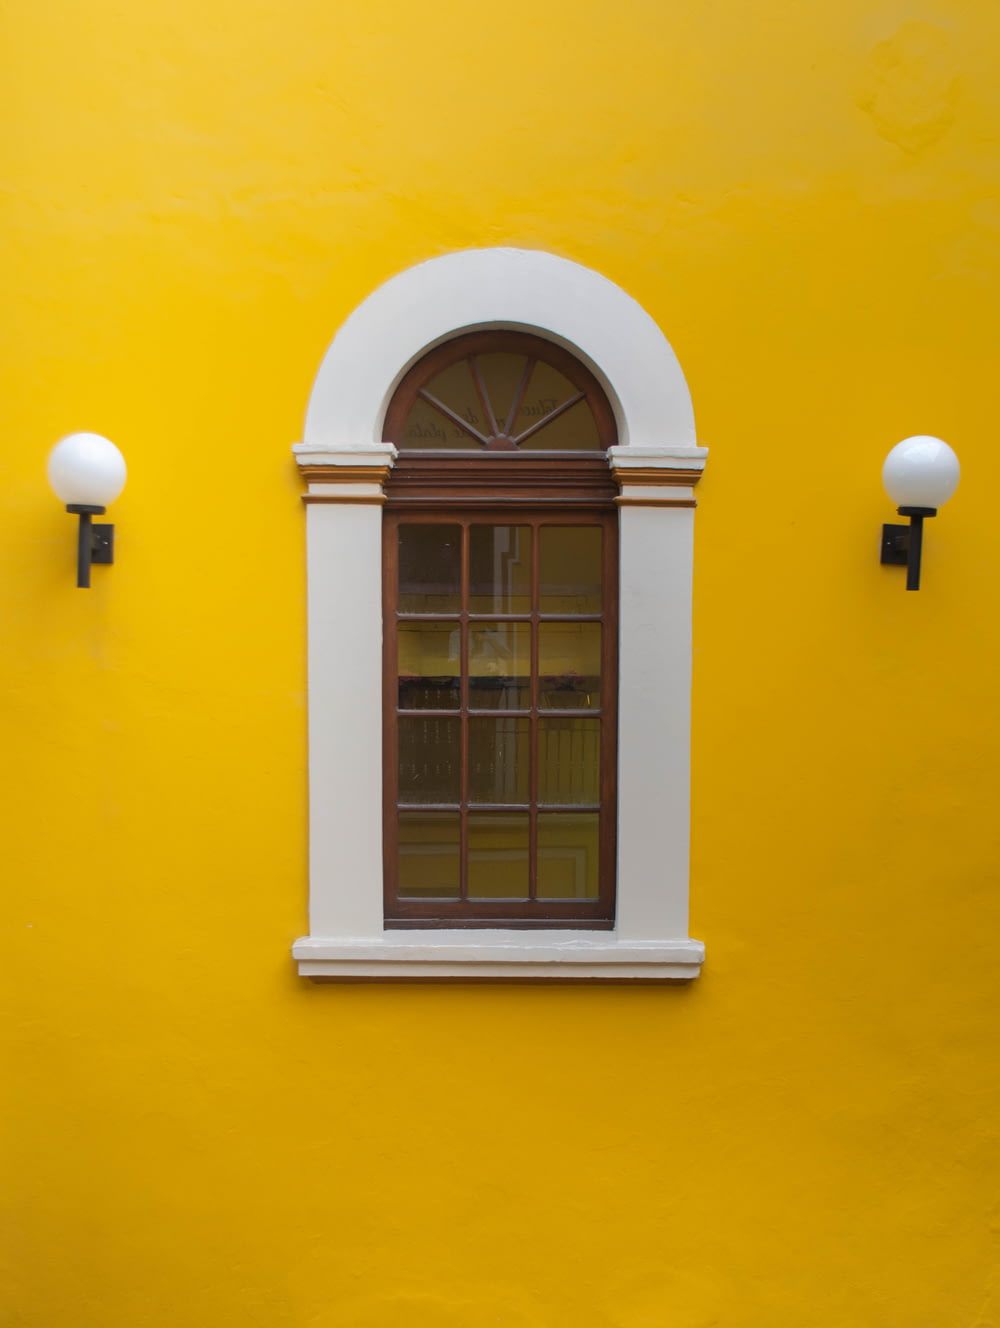 a window in a yellow building